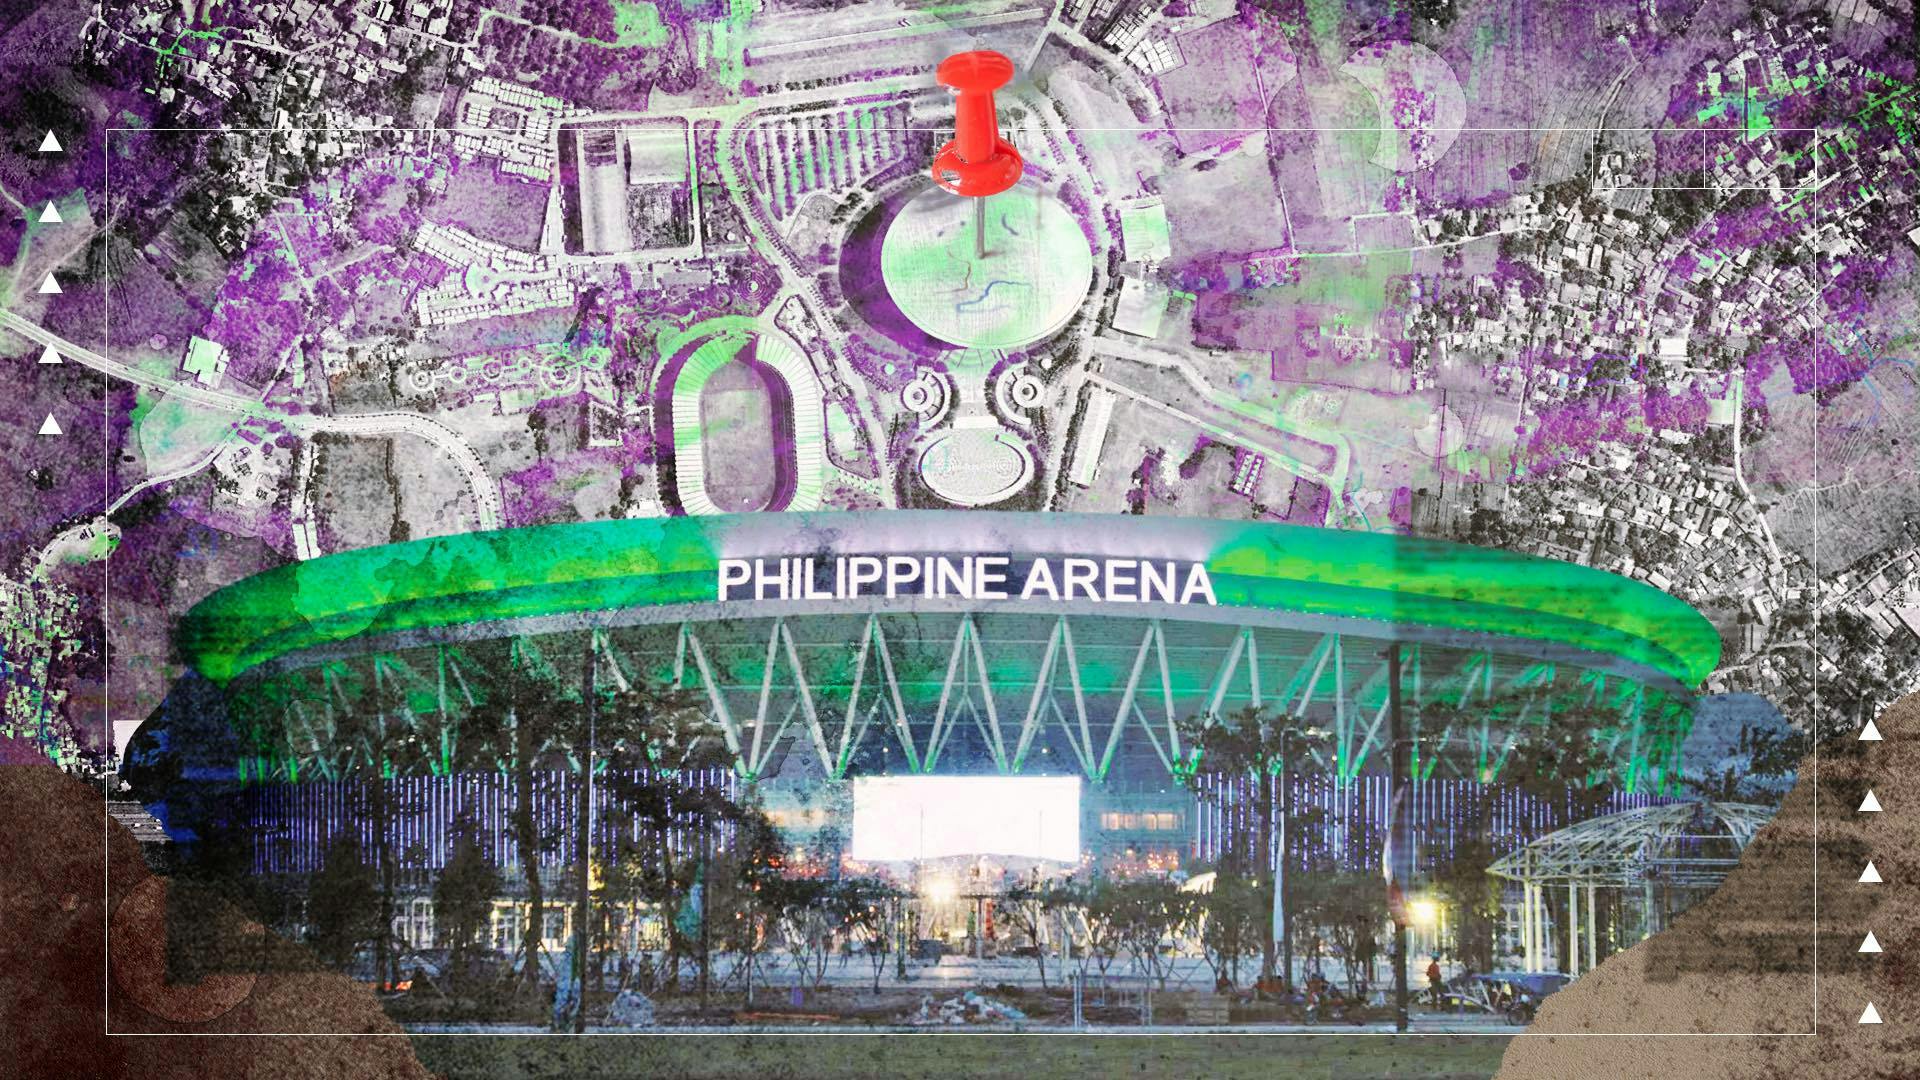 All-in-one guide to Philippine Arena to witness highly-anticipated FIBA World Cup opener